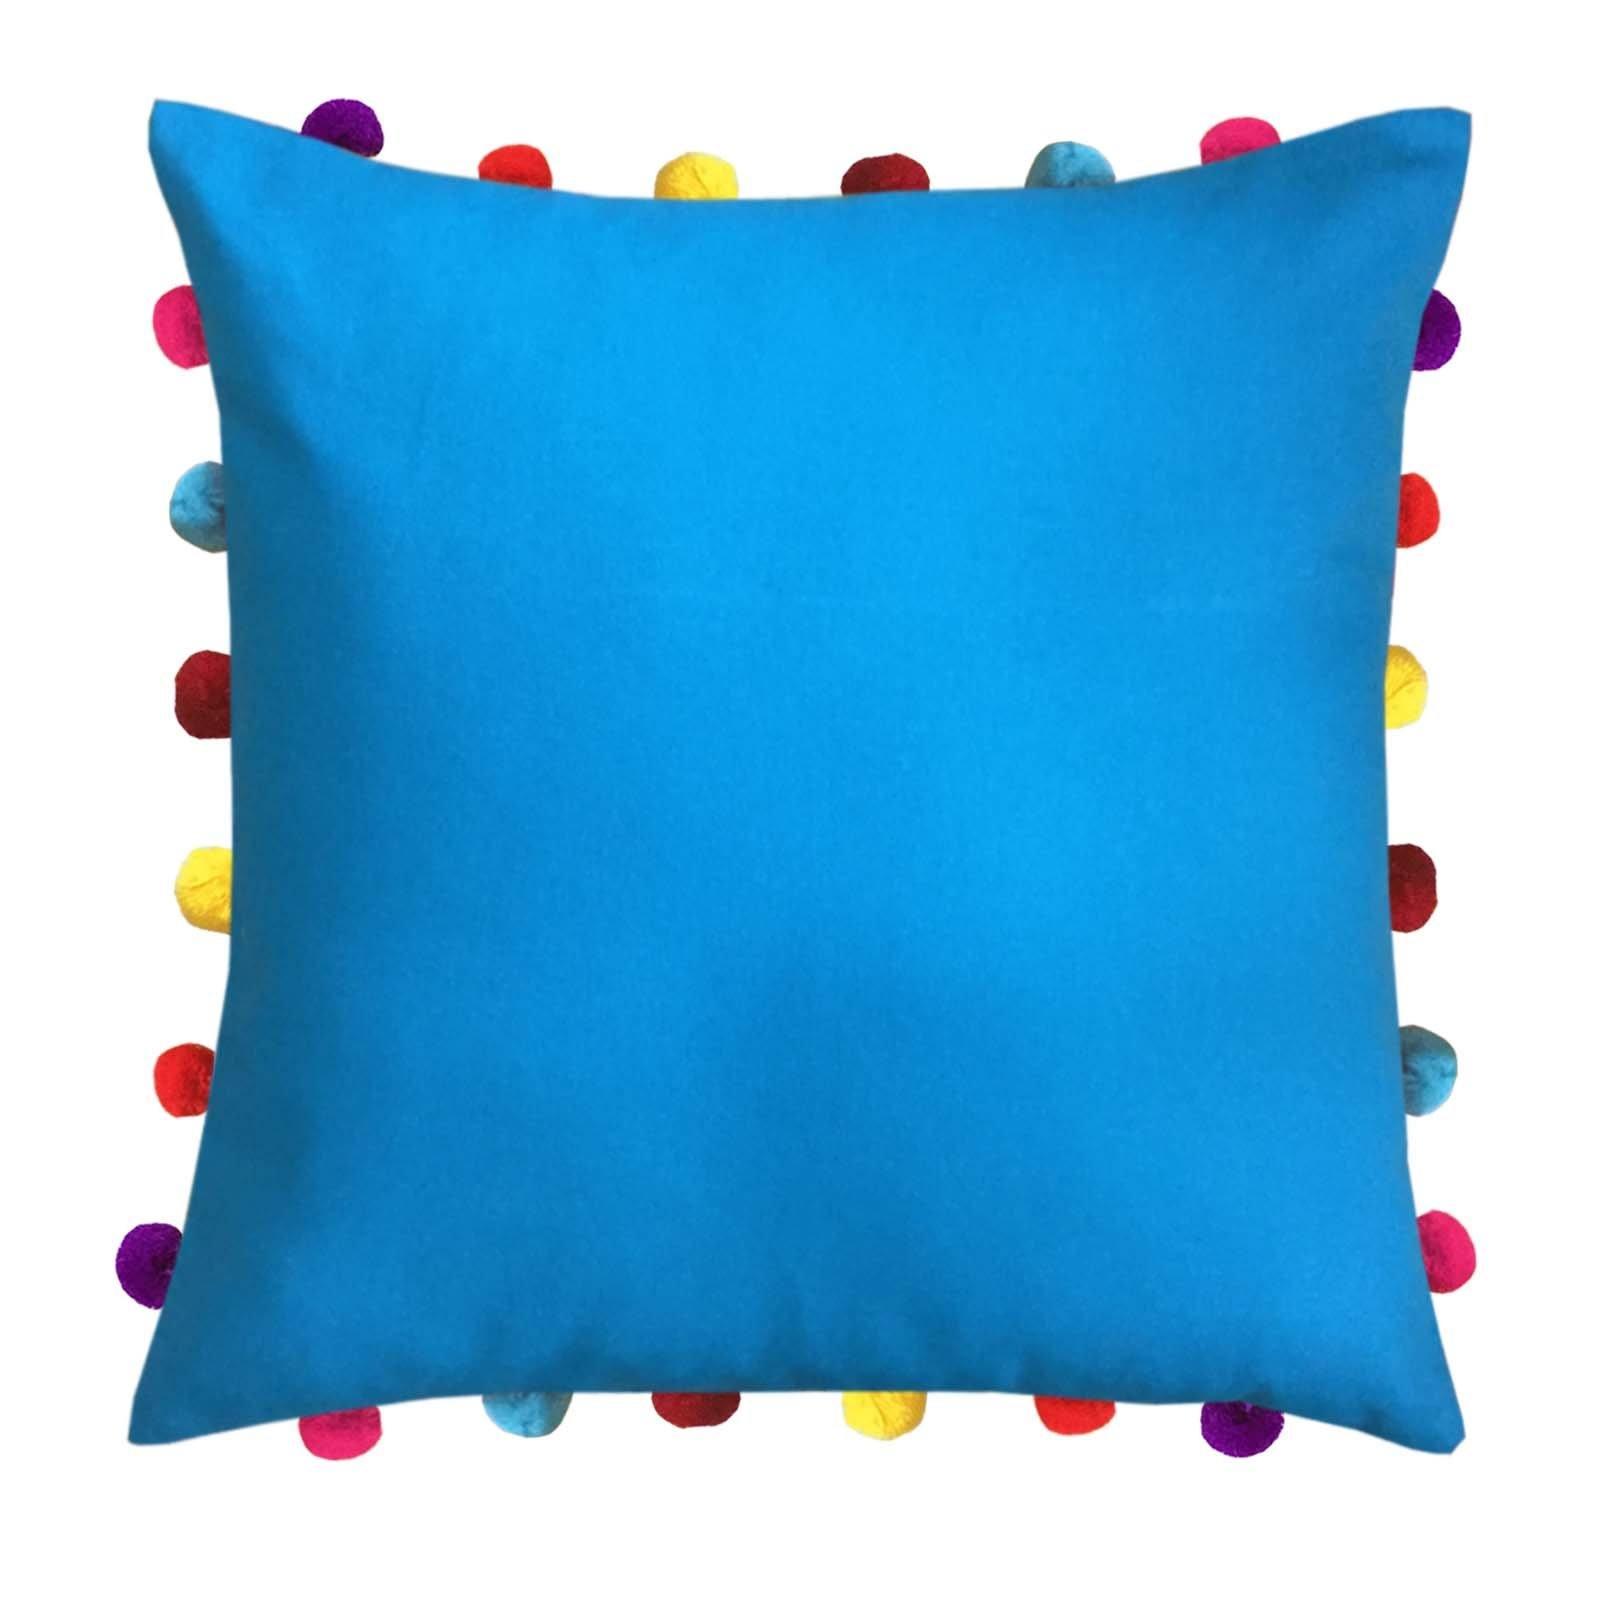 Lushomes Blue Sofa Cushion Cover Online with Colorful Pom Pom (Pack of 1 pc, 18 x 18 inches) - Lushomes